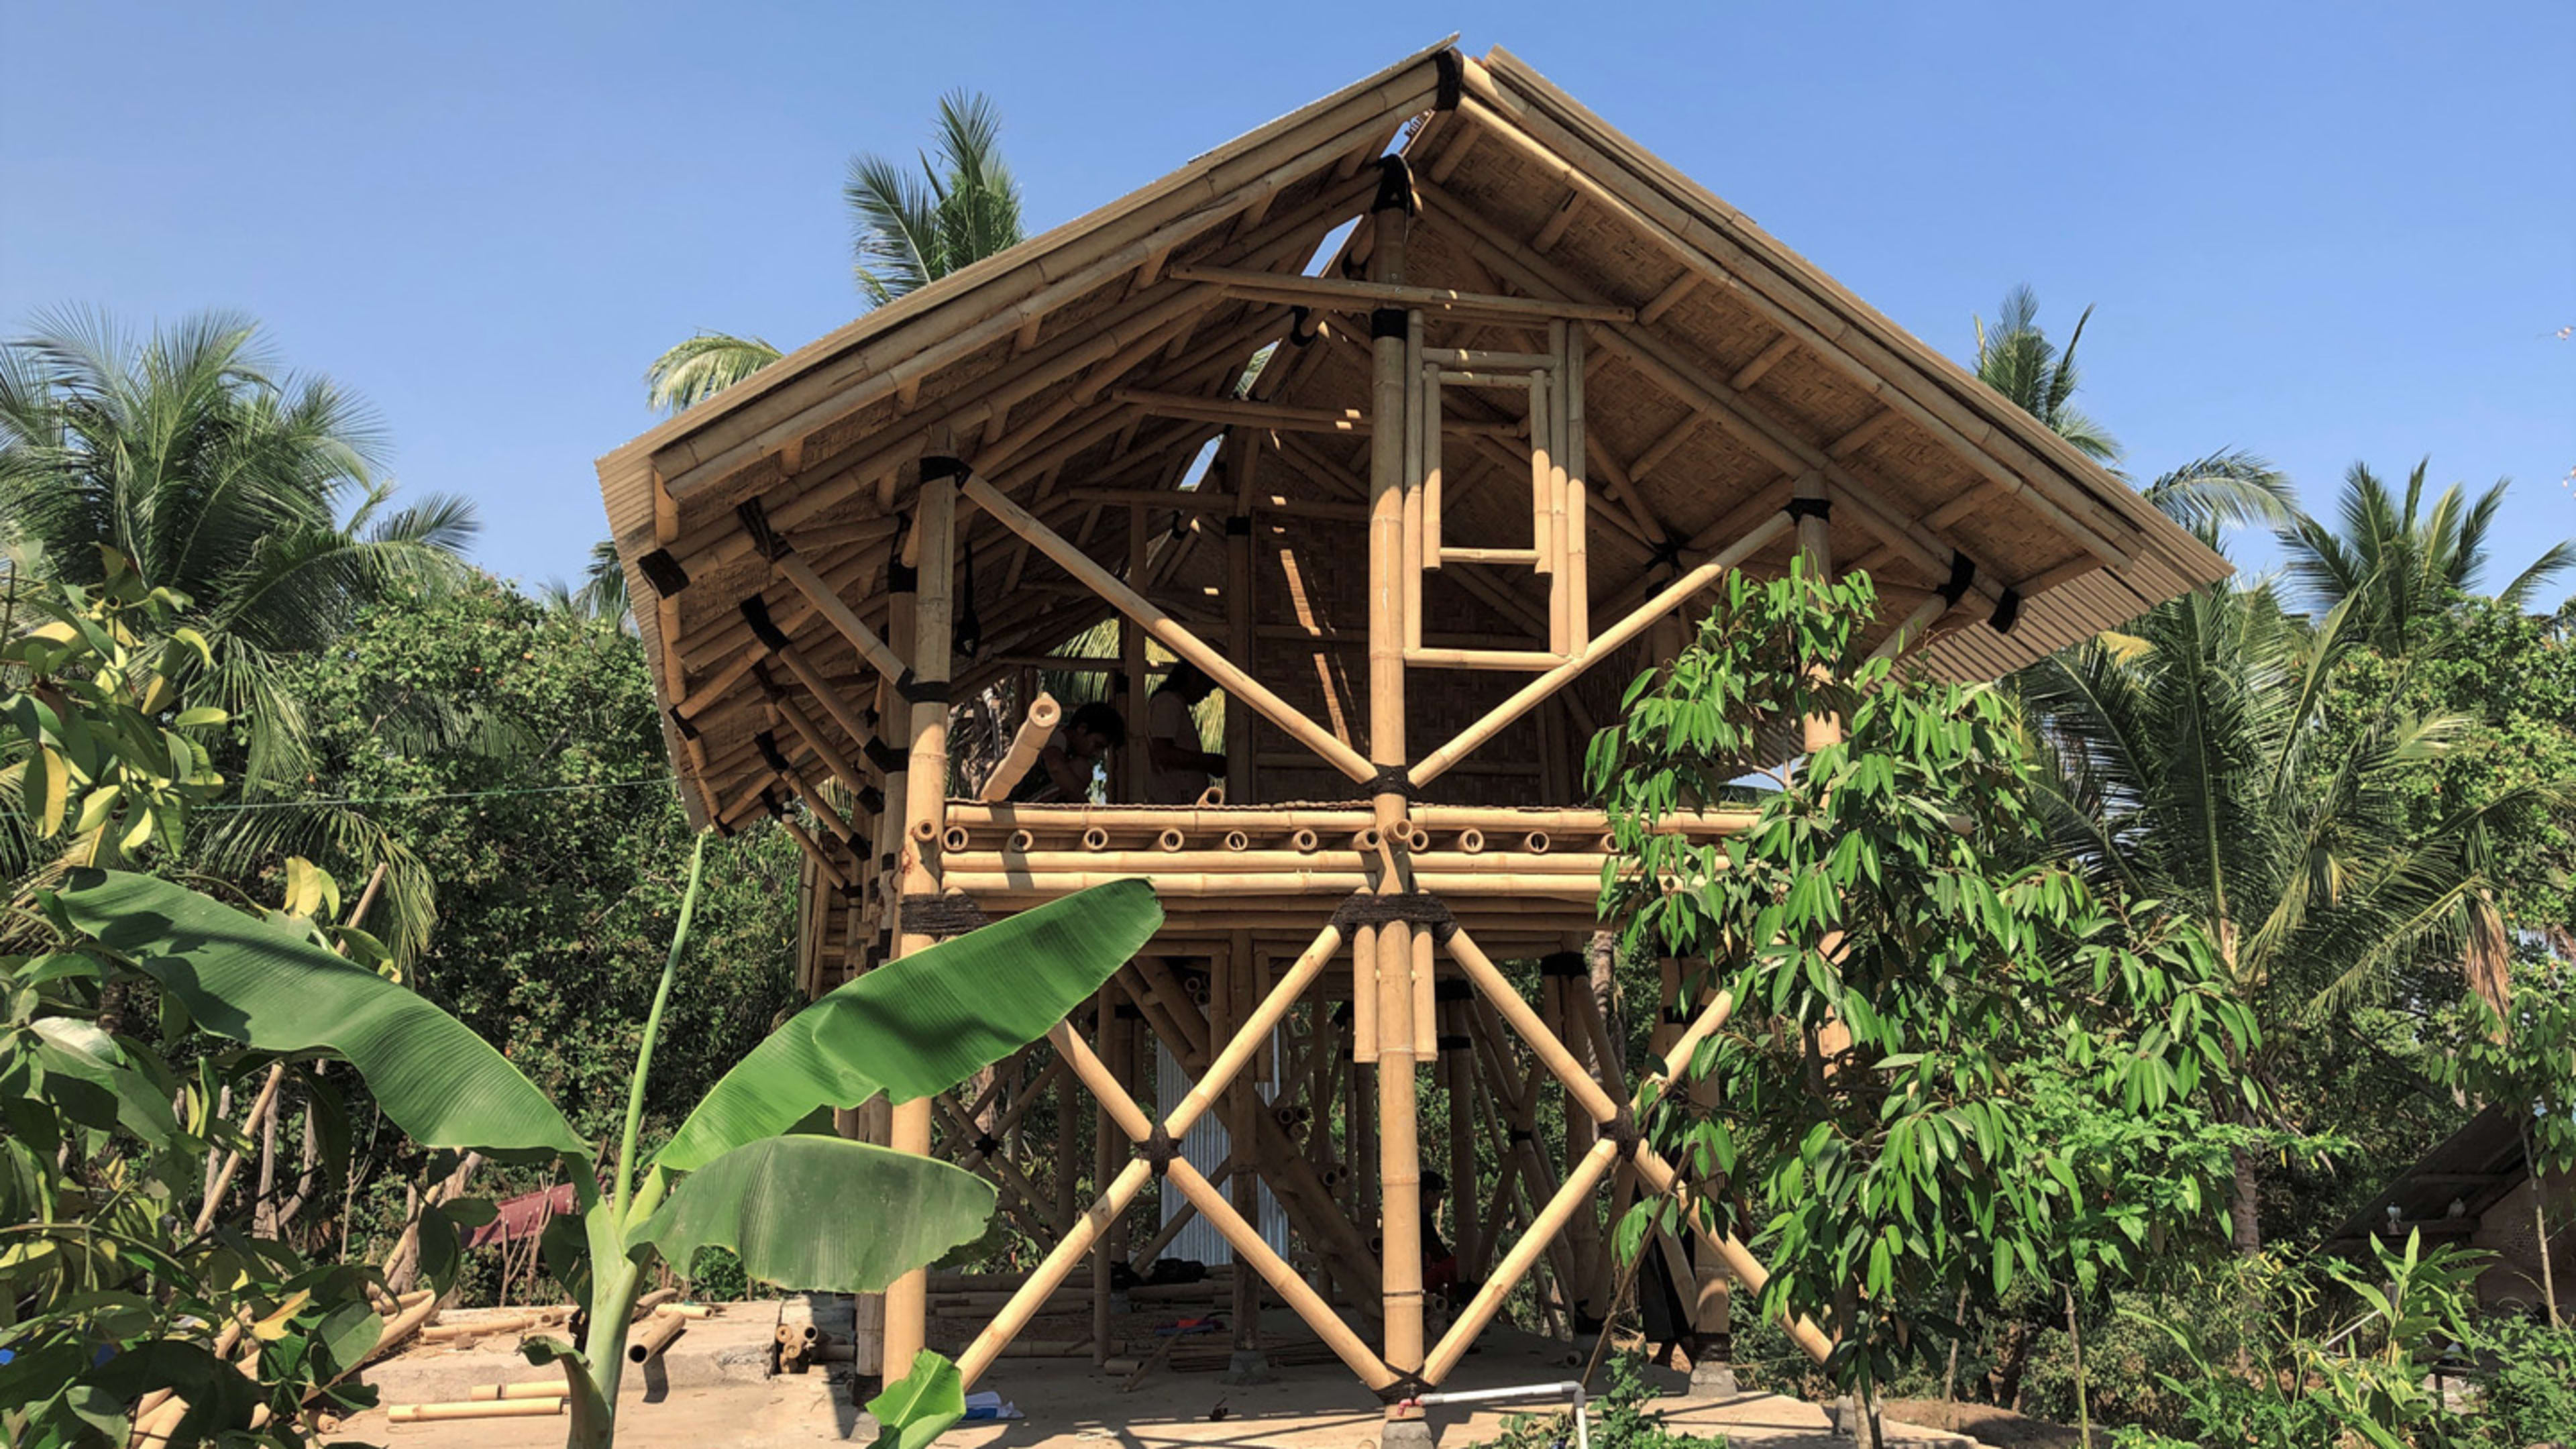 These bamboo houses are designed to stay standing during earthquakes